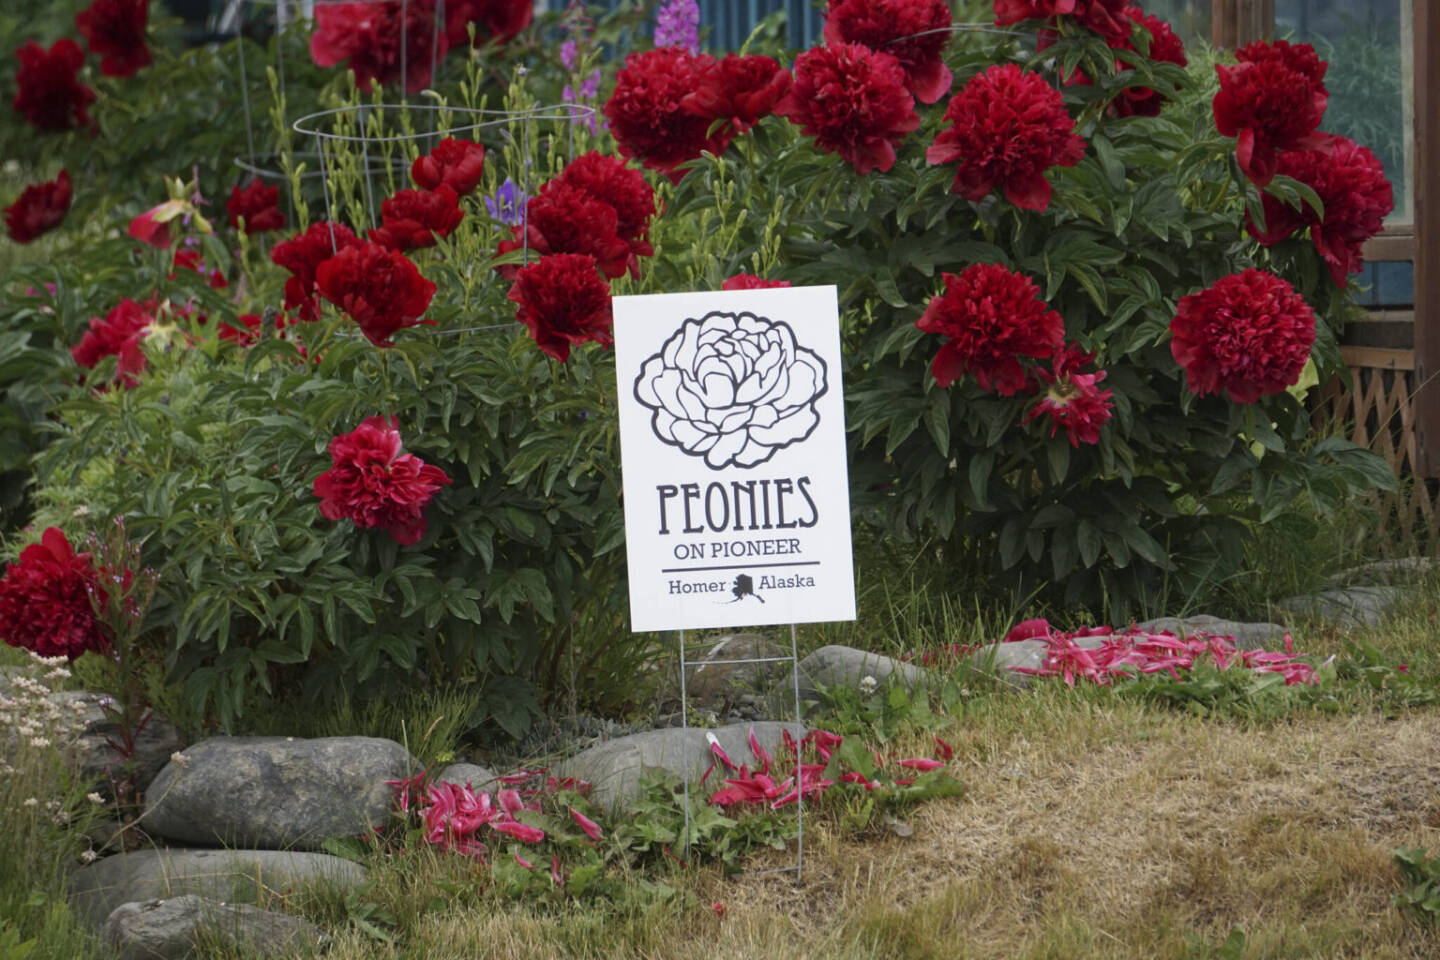 A display of peonies is in bloom on Pioneer Avenue in July 2022 in Homer, Alaska. Photo by Michael Armstrong, Homer News file photo